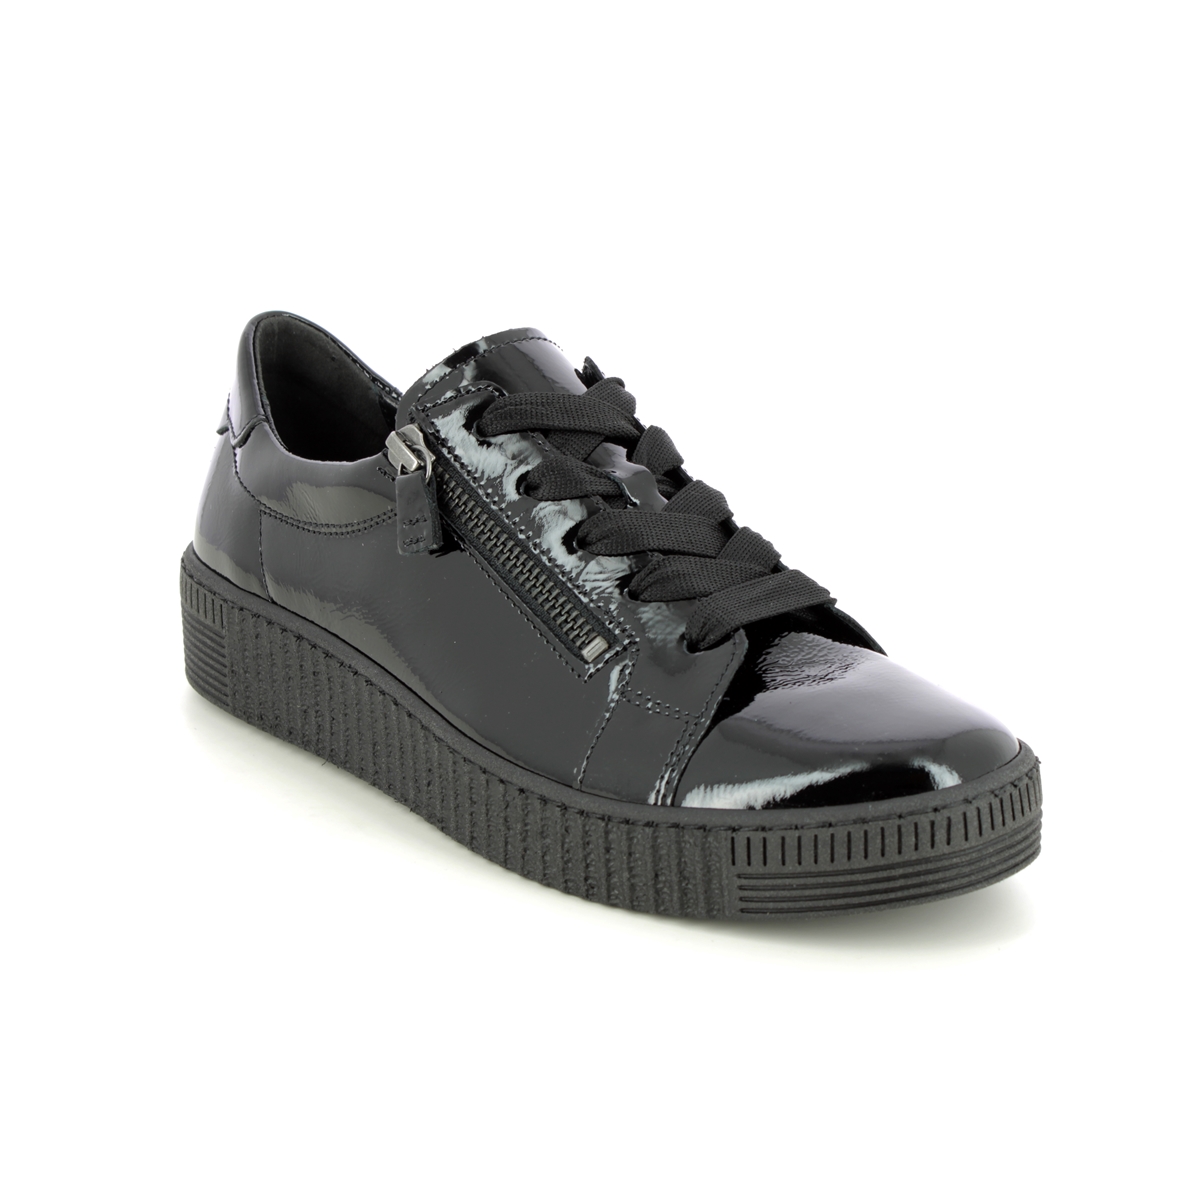 Gabor Wisdom Black Patent Womens Trainers 93.334.97 In Size 4 In Plain Black Patent  Womens Trainers In Soft Black Patent Leather